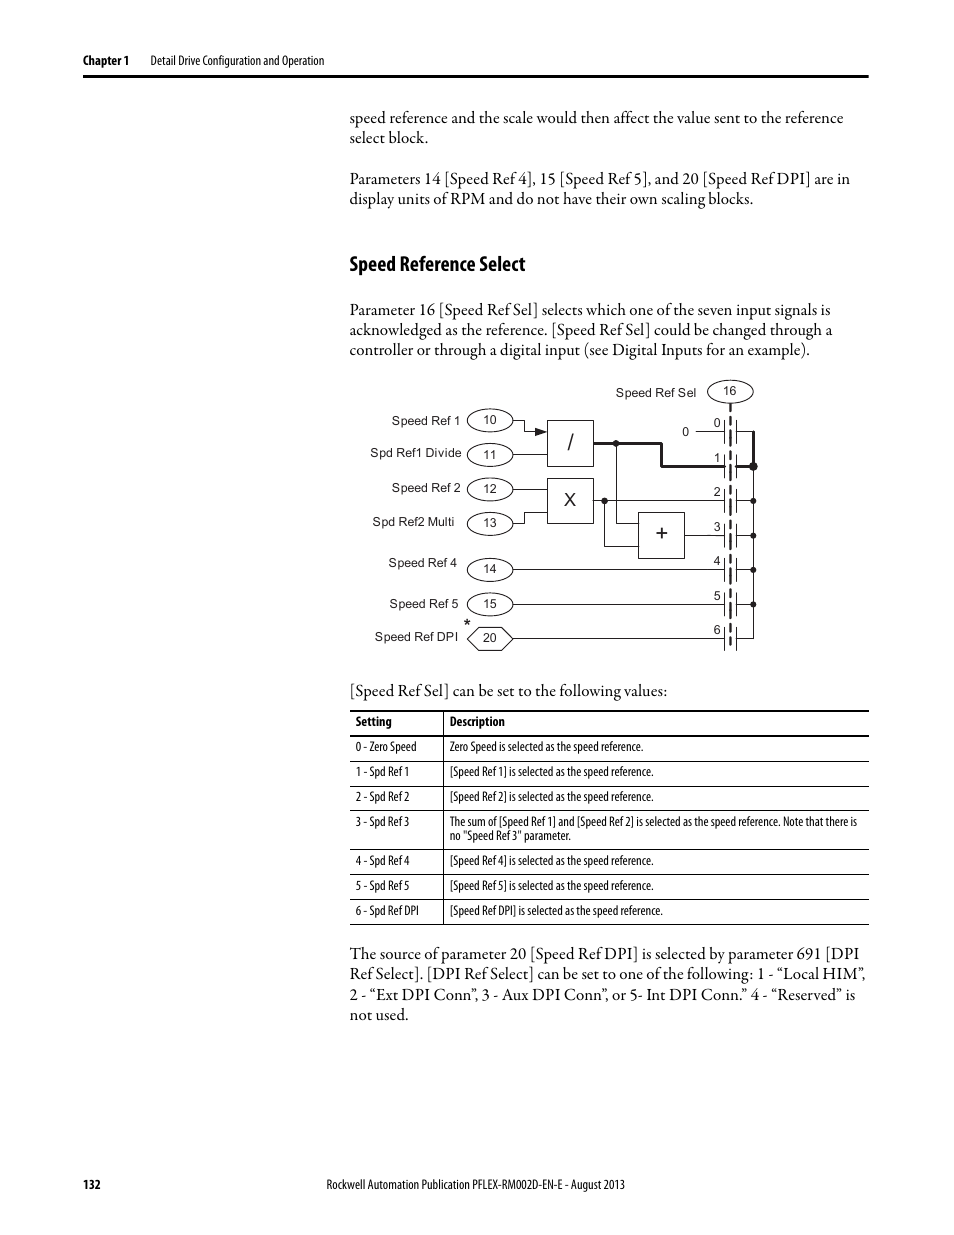 Speed reference select | Rockwell Automation 20D PowerFlex 700S with Phase I Control Reference Manual User Manual | Page 132 / 190